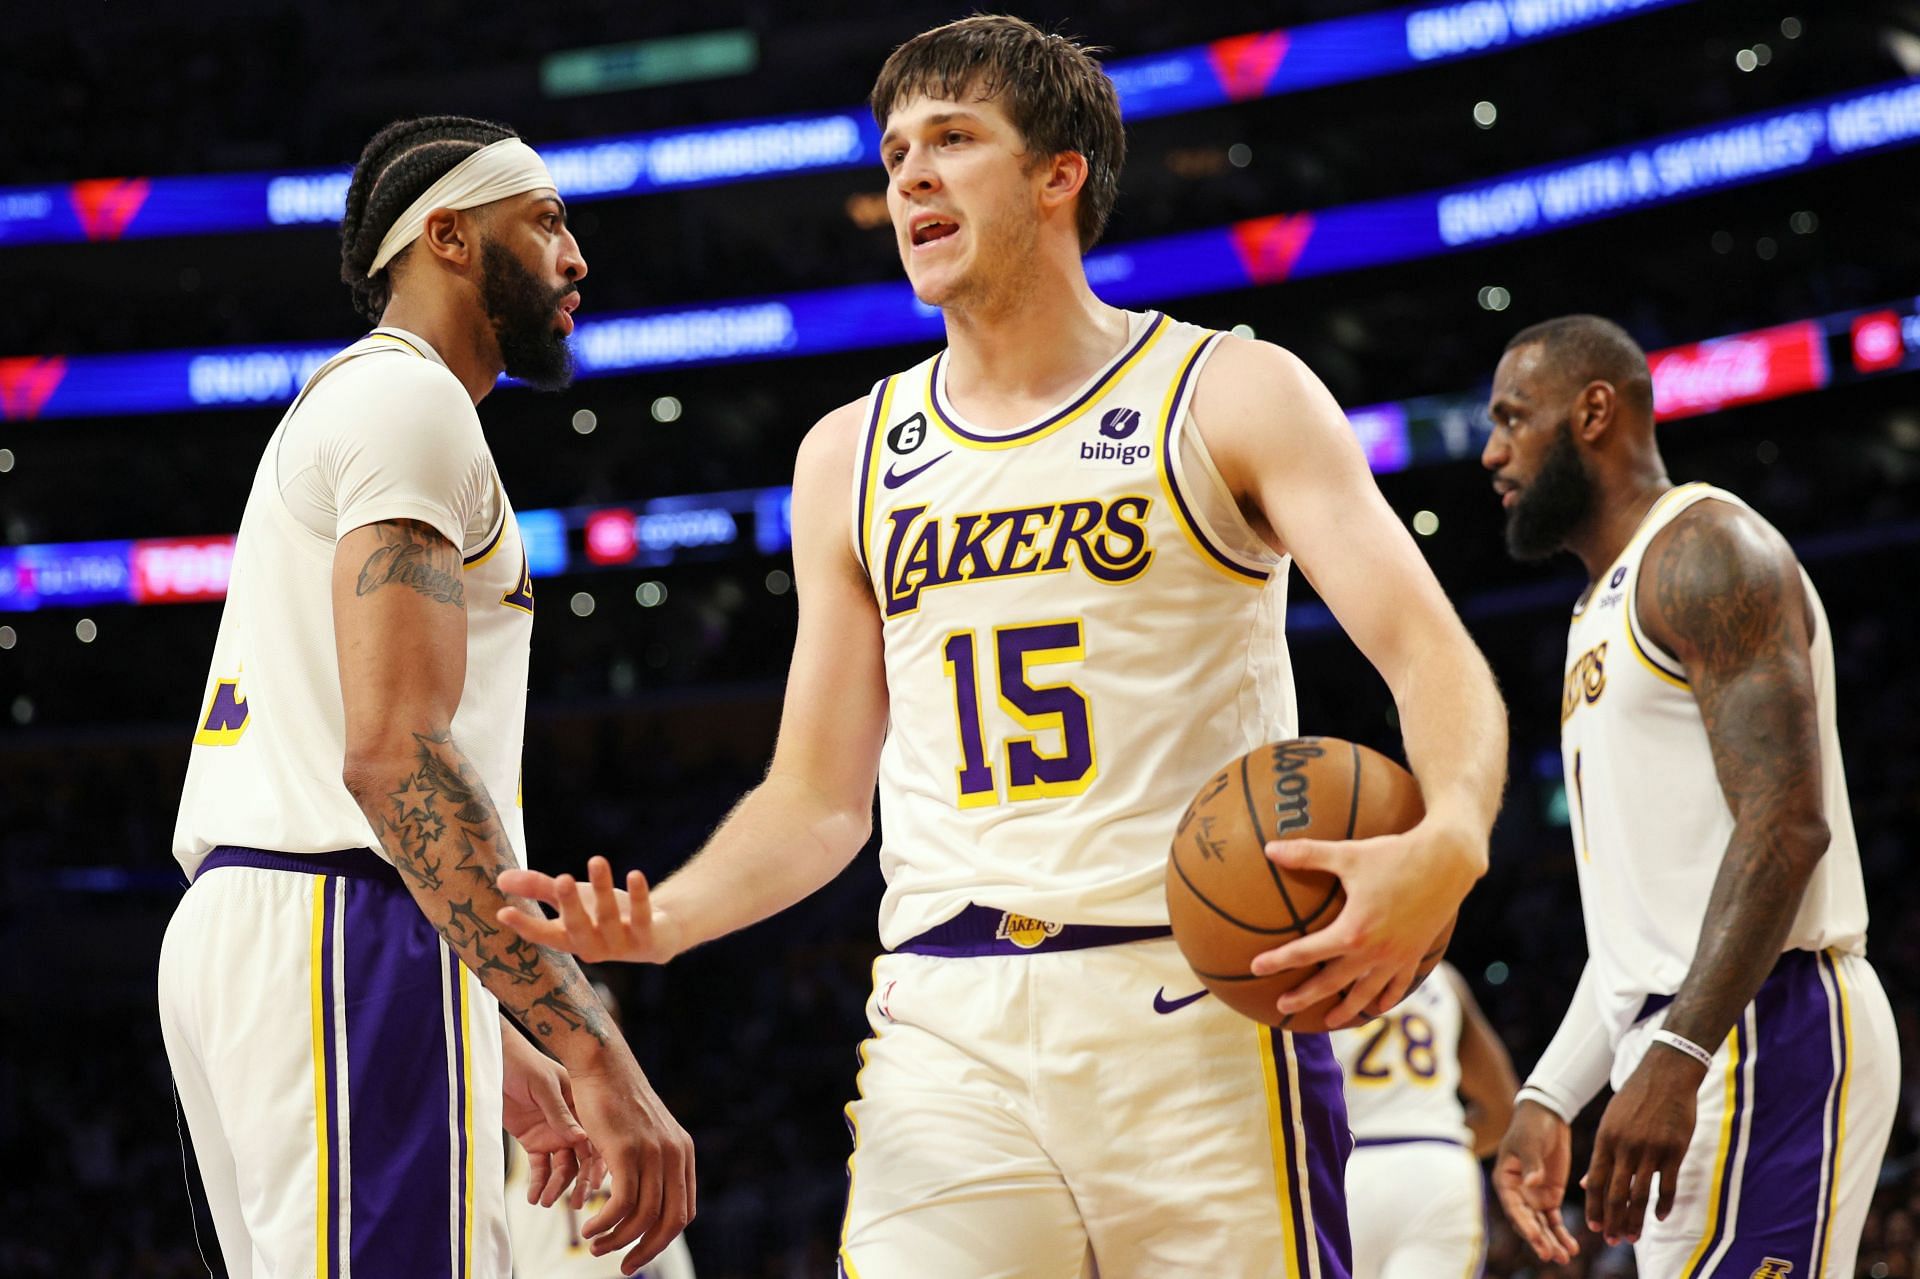 Austin Reaves emerged as a superb third option for the Lakers this season